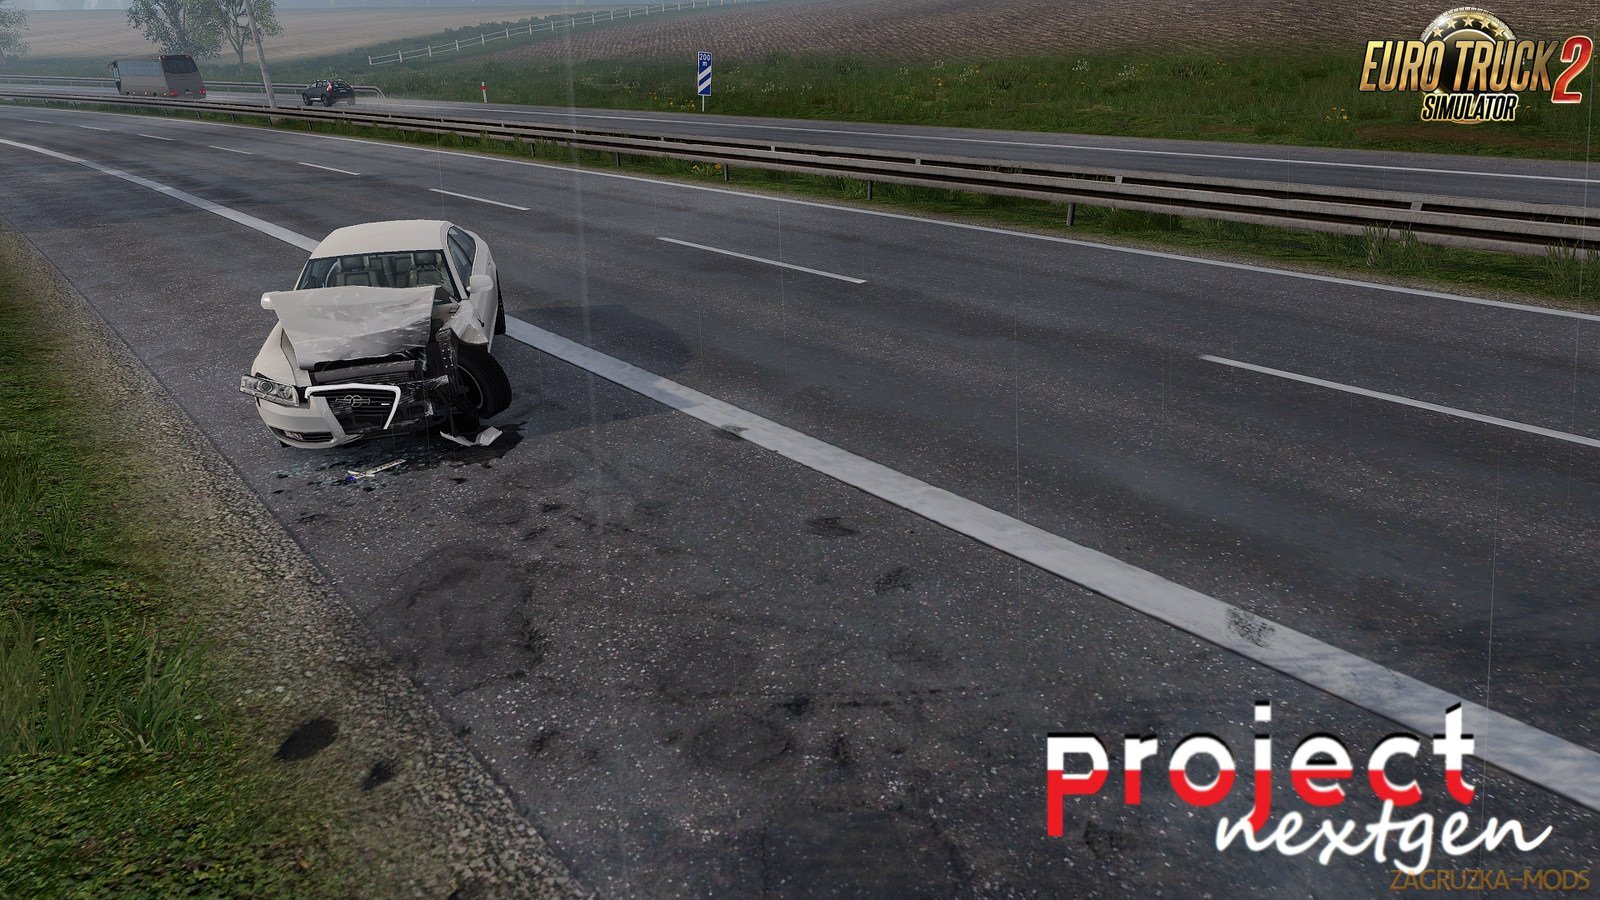 Project Next-Gen Graphic Mod v1.6 by DamianSVW